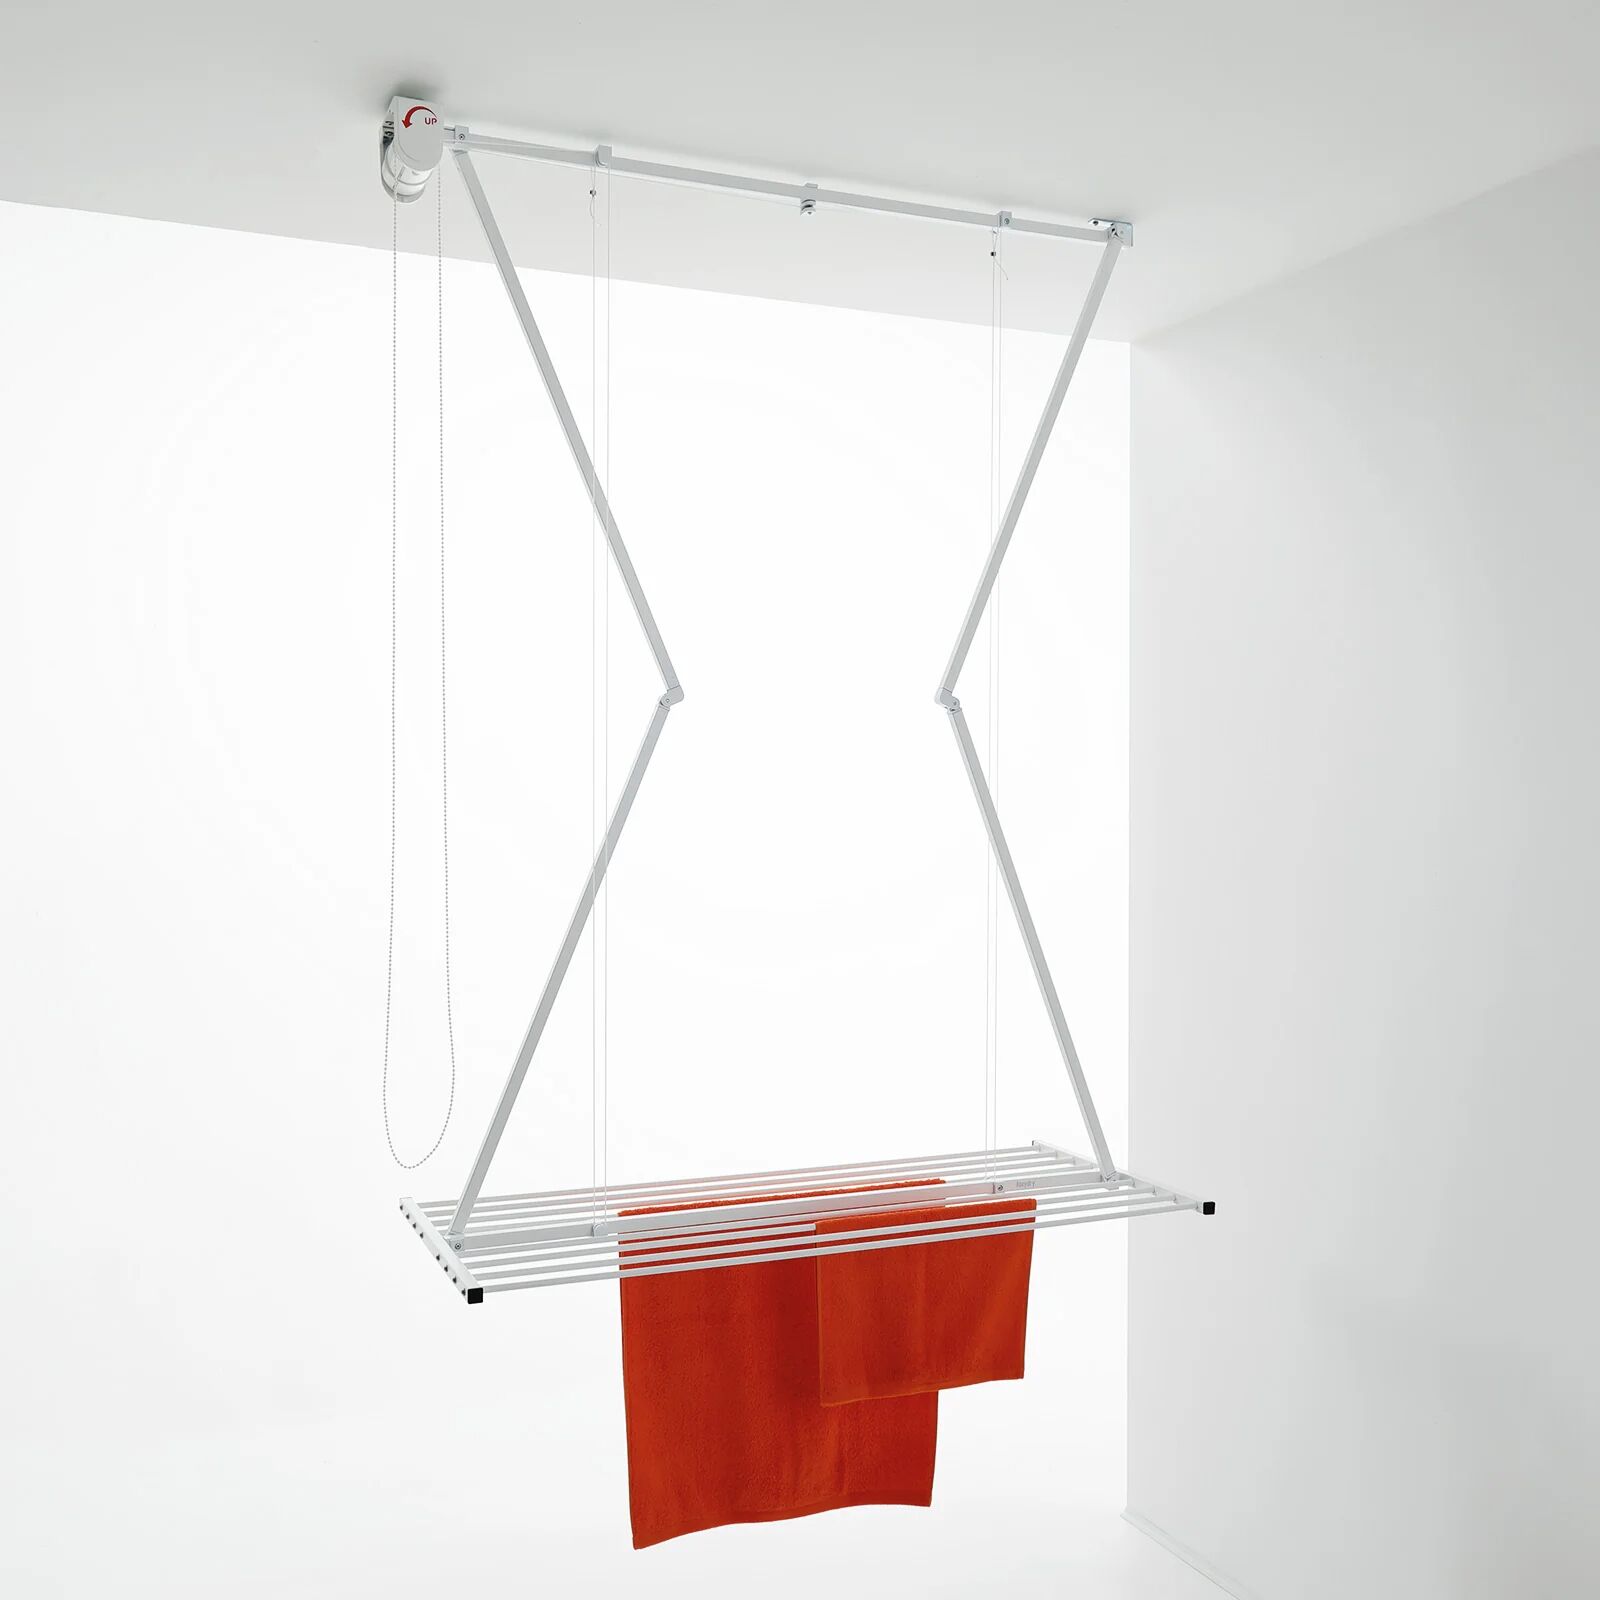 Foxydry Mini White 150 ceiling-mounted drying rack manual clothes